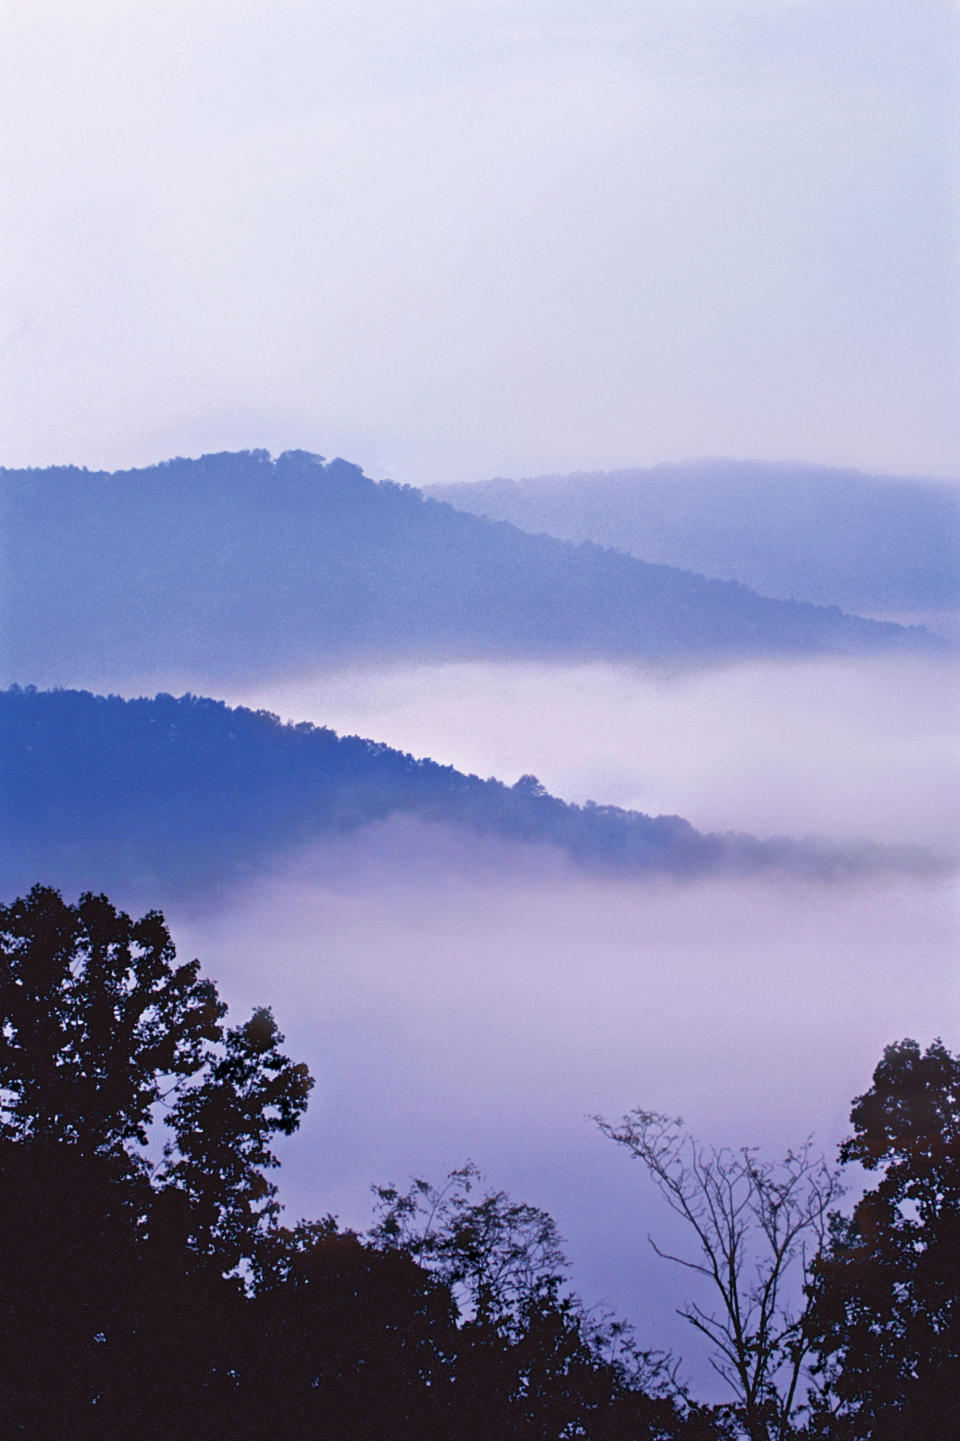 Abundant overlooks offer views of mist-shrouded mountains along the parkway.